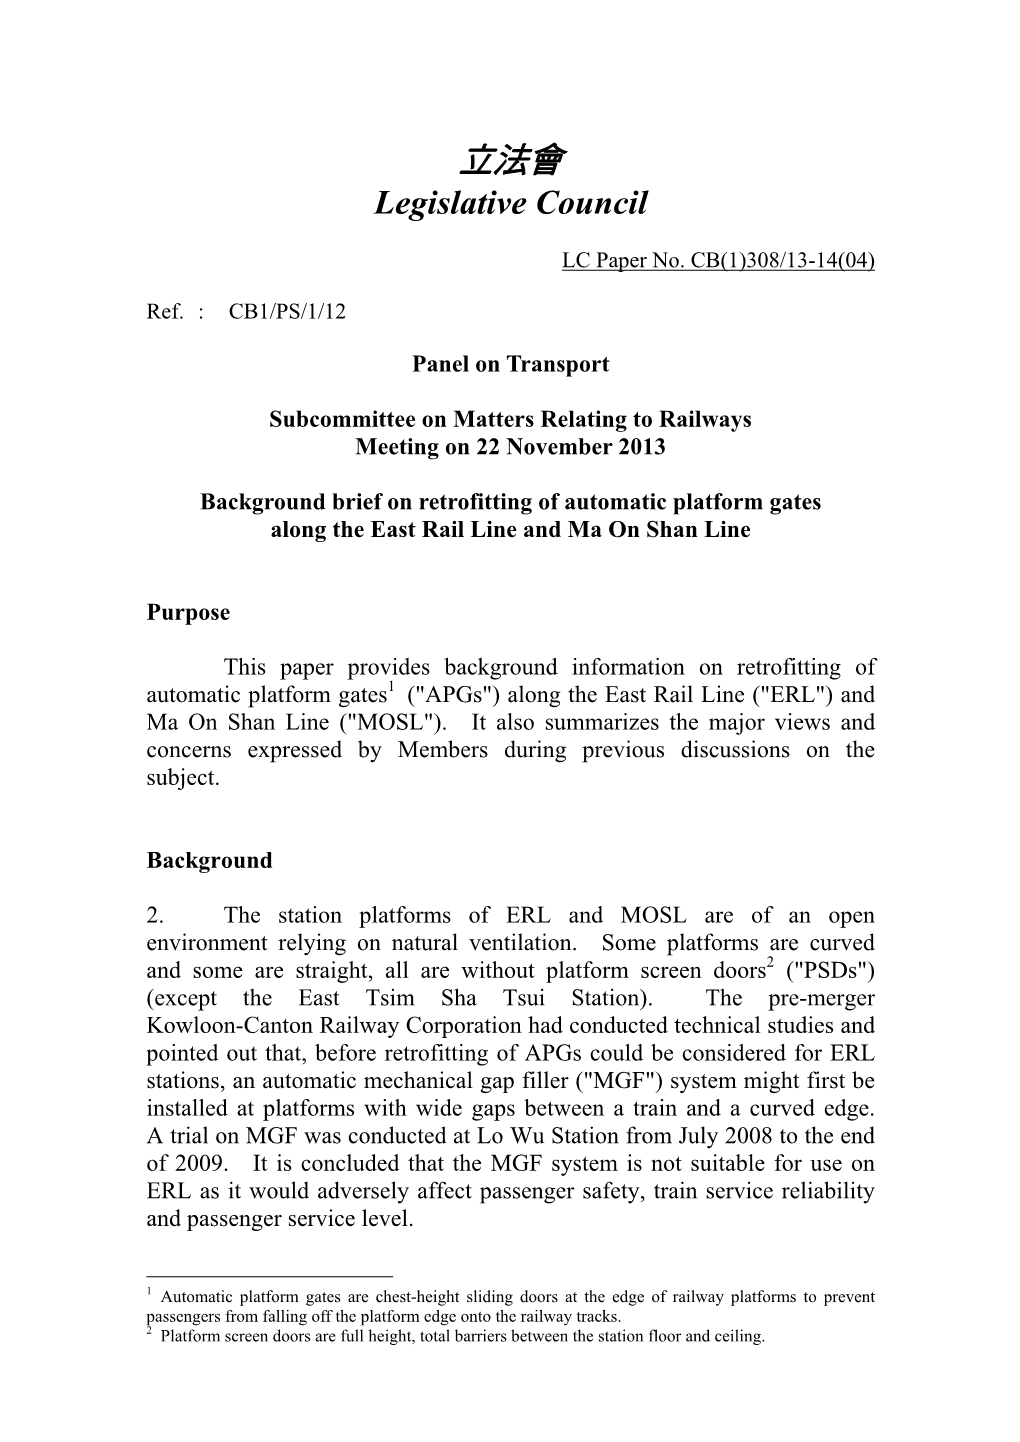 Background Brief on Retrofitting of Automatic Platform Gates Along the East Rail Line and Ma on Shan Line